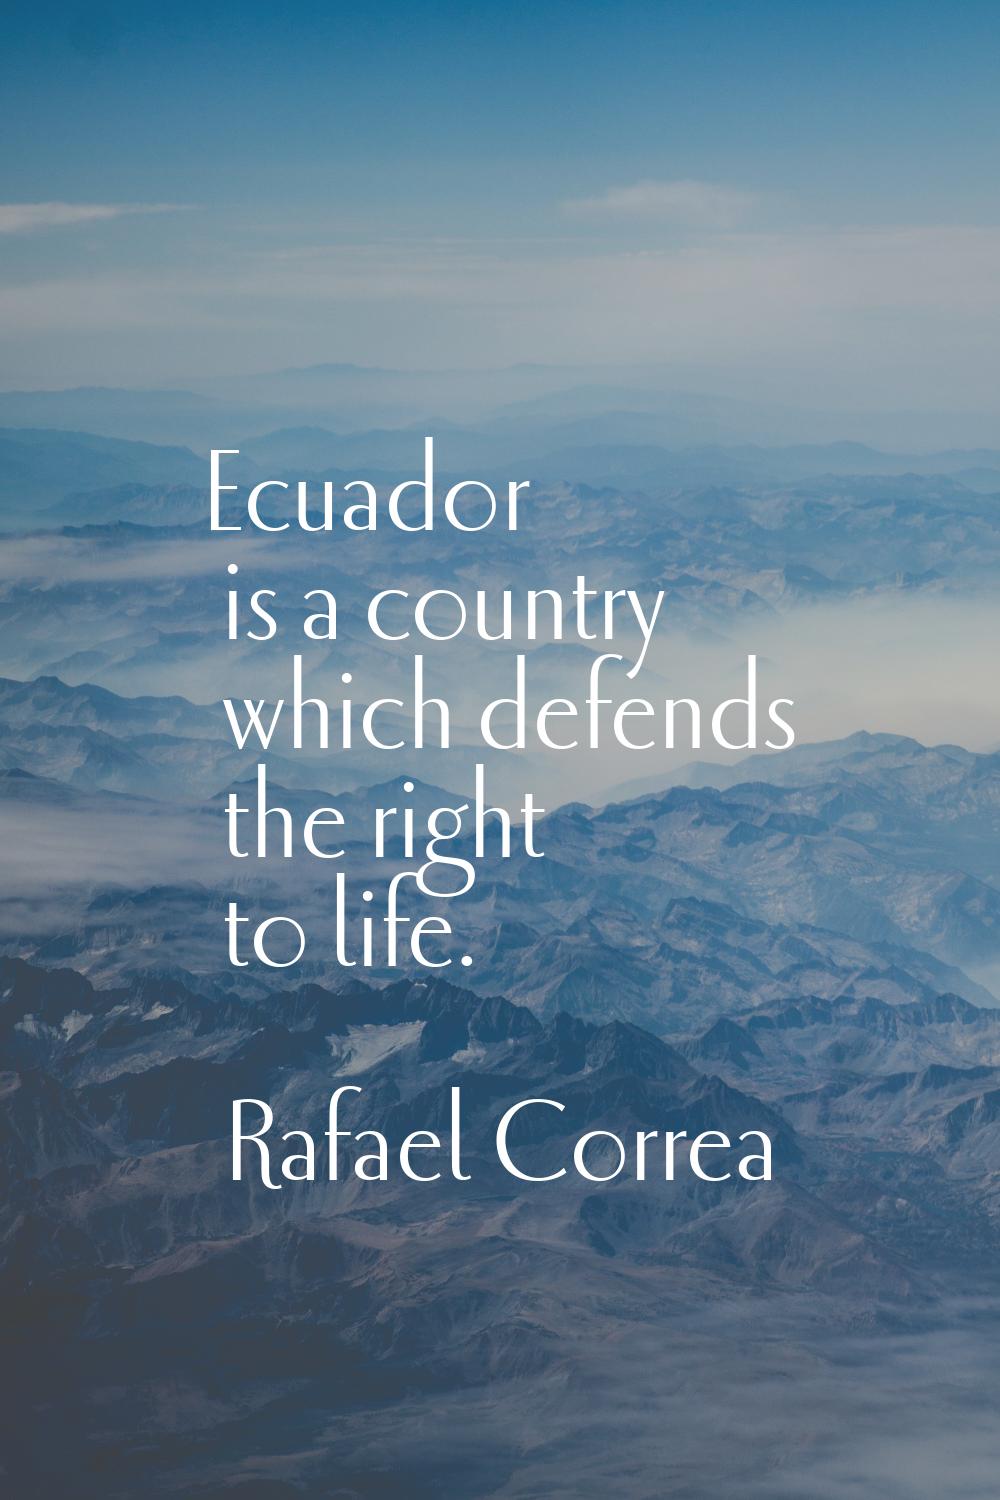 Ecuador is a country which defends the right to life.